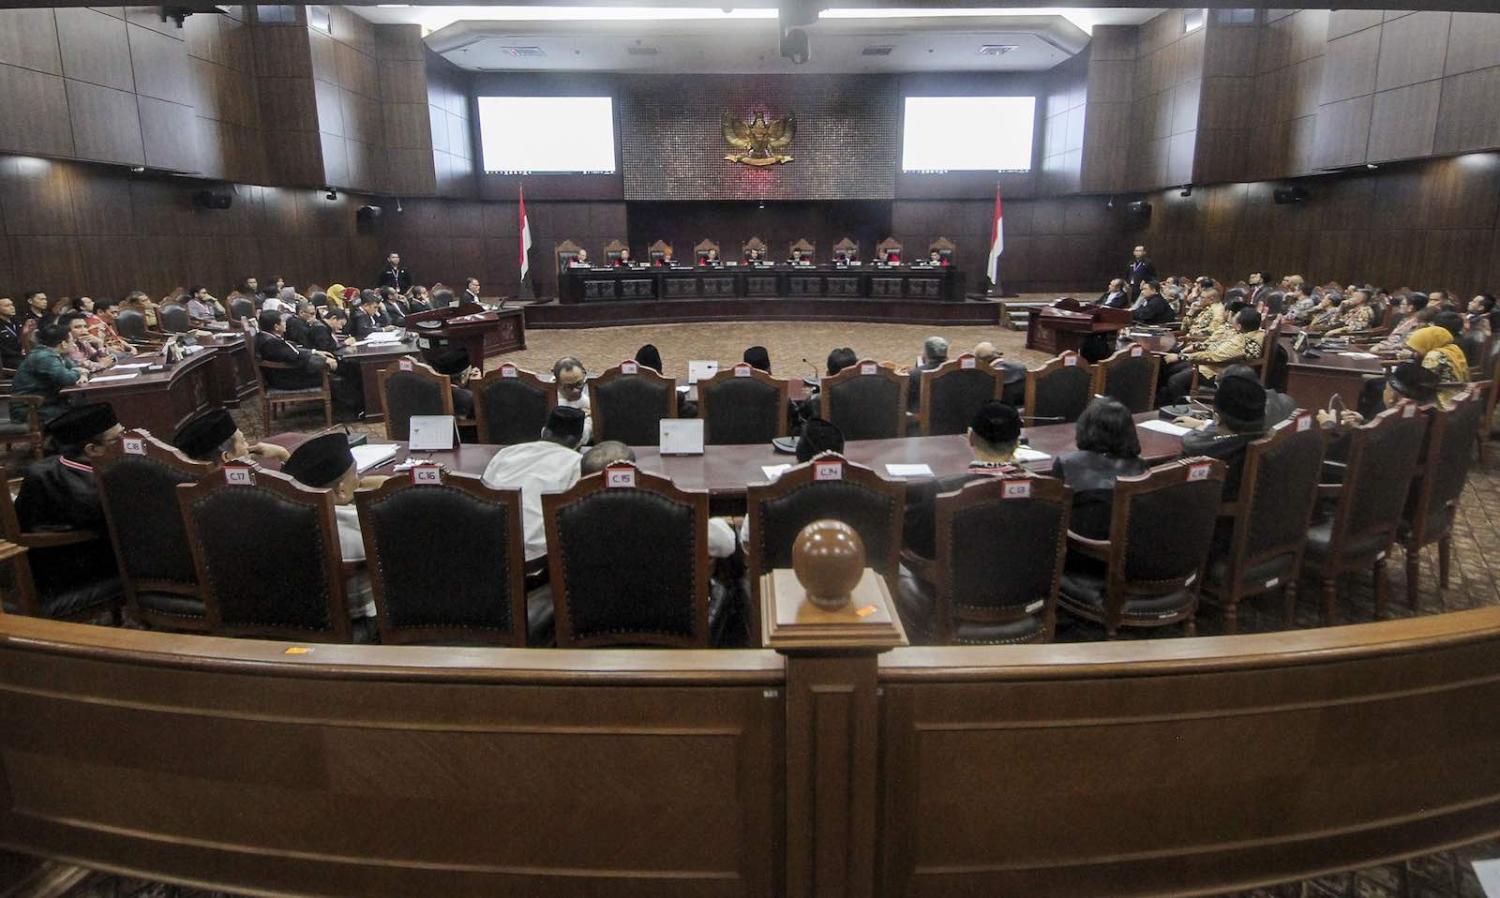 Hearings on 2019 Presidential election dispute last year in the Constitutional Court in Jakarta, Indonesia (Eko Siswono Toyudho via Getty Images)